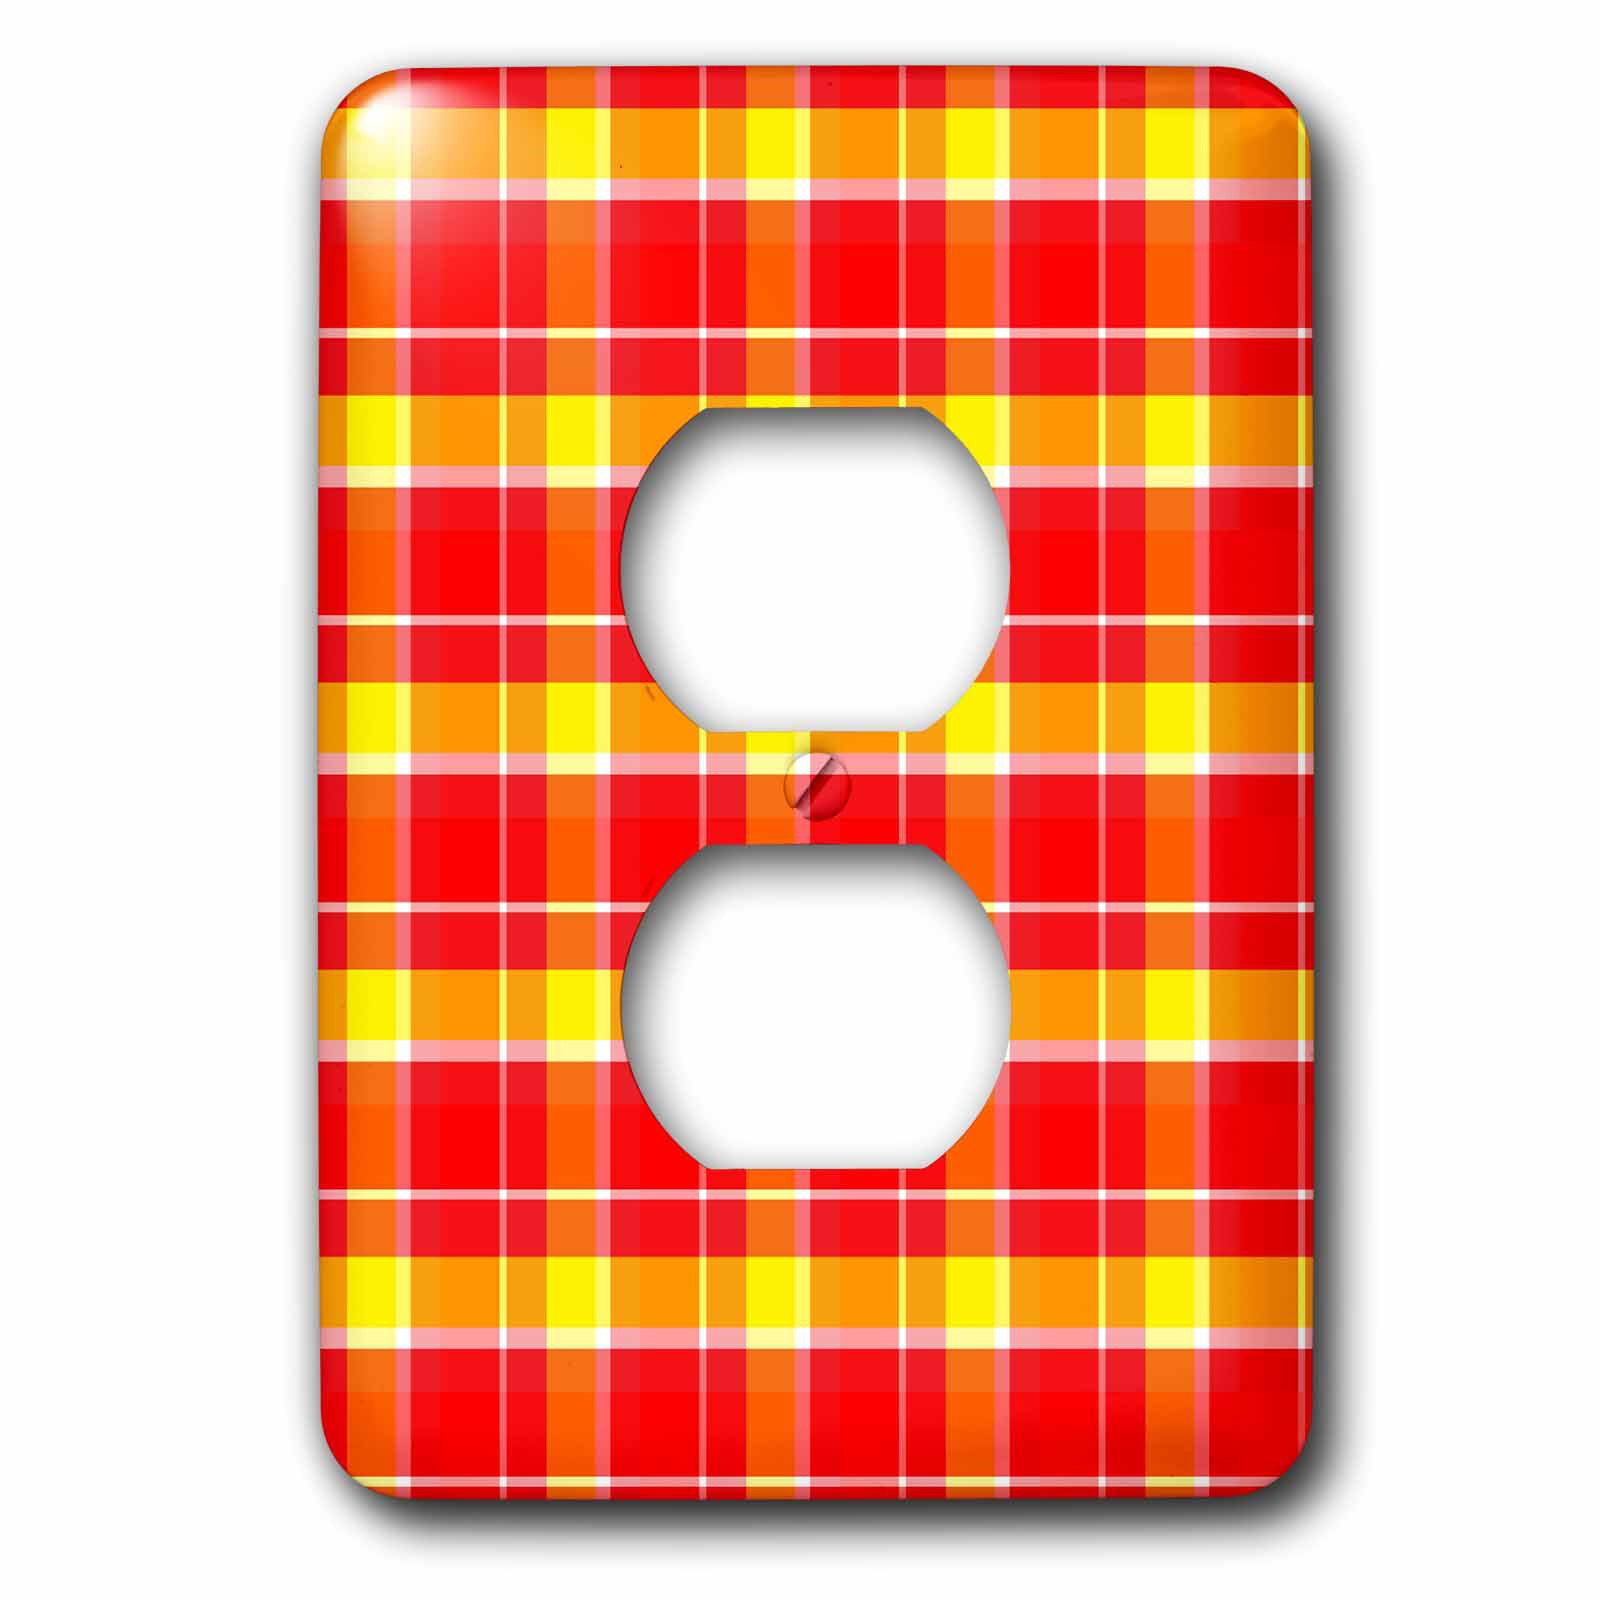 Multi-Color 3dRose lsp_27404_6 Large red and yellow country plaid Outlet Cover 